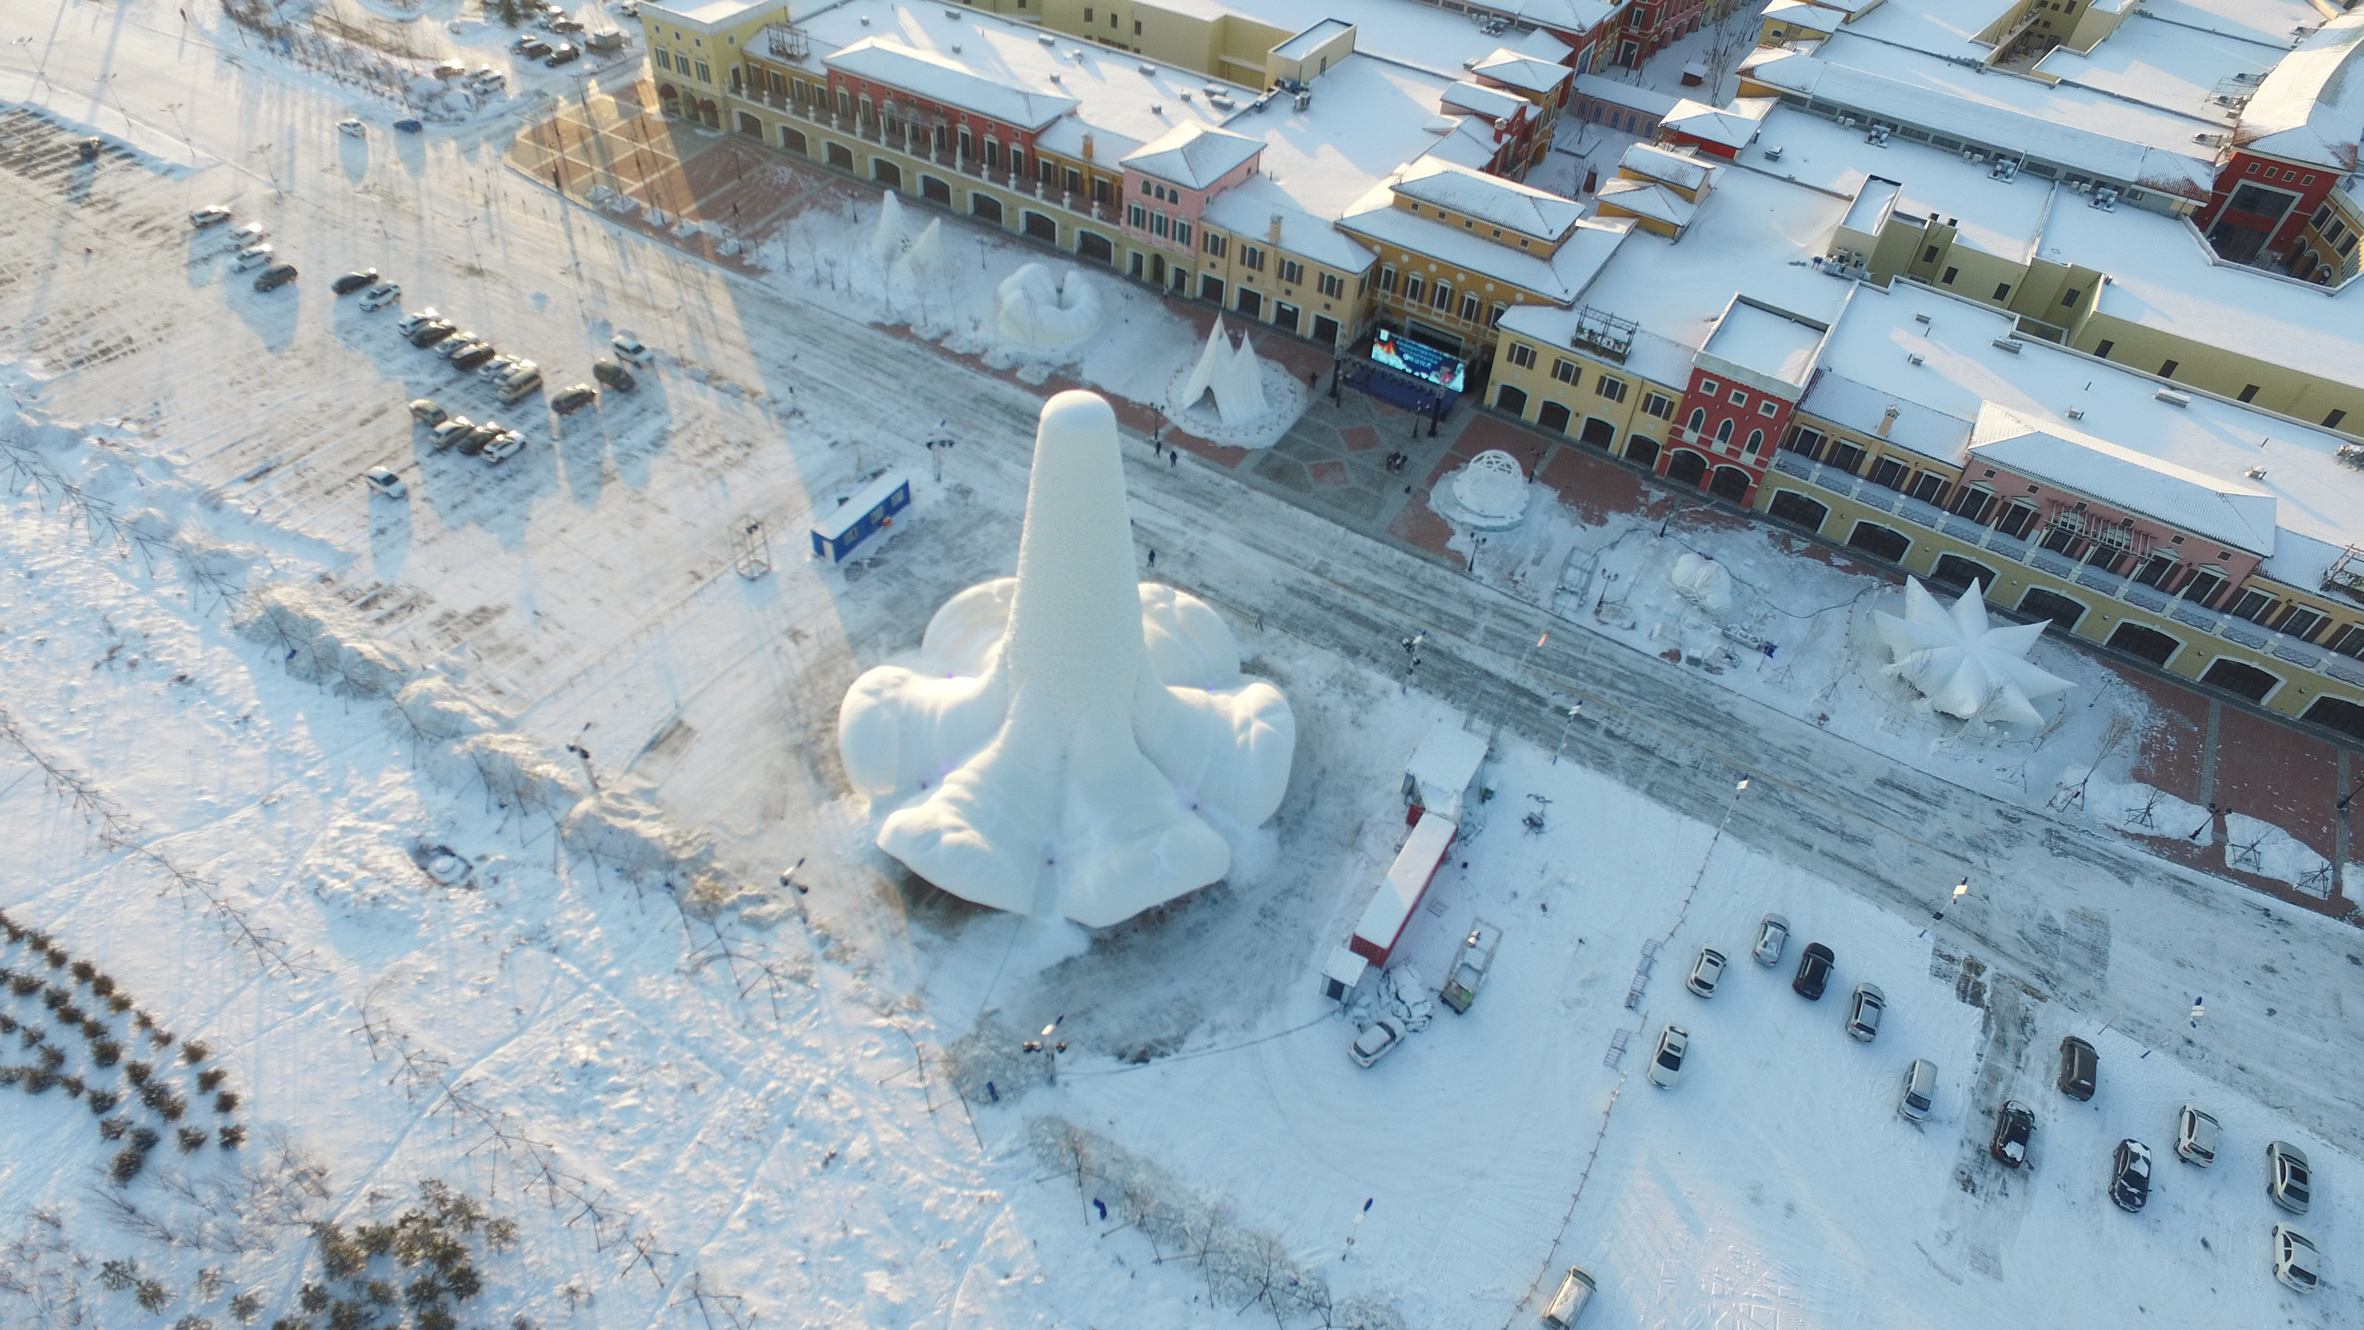 World's tallest ice tower built with the shape of a flamenco dress